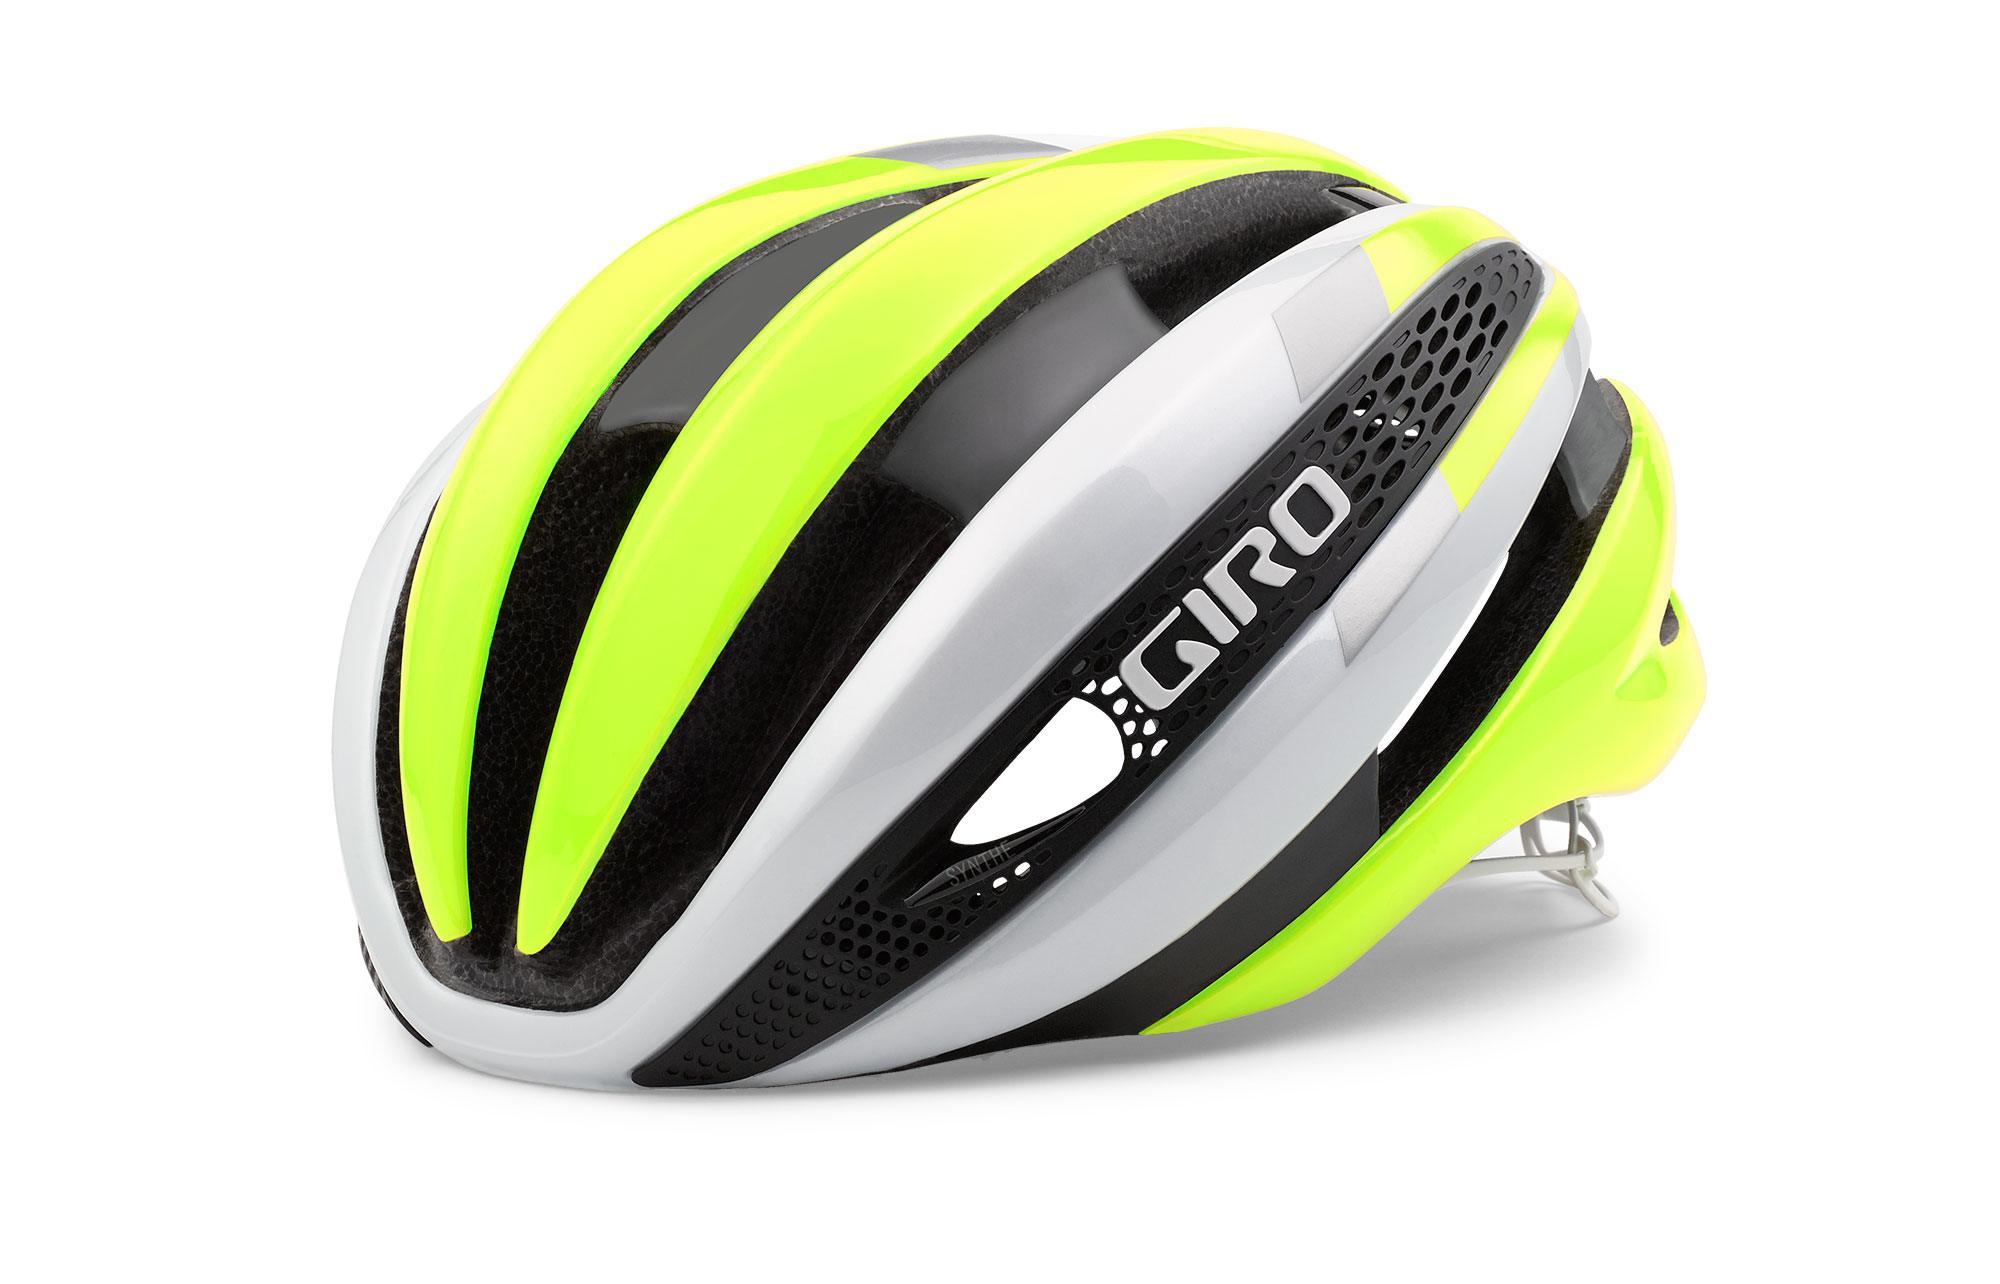 Medium 55-59cm ,New Genuine Nos Giro Synthe MIPS Cycling Helmets,Various Colors 